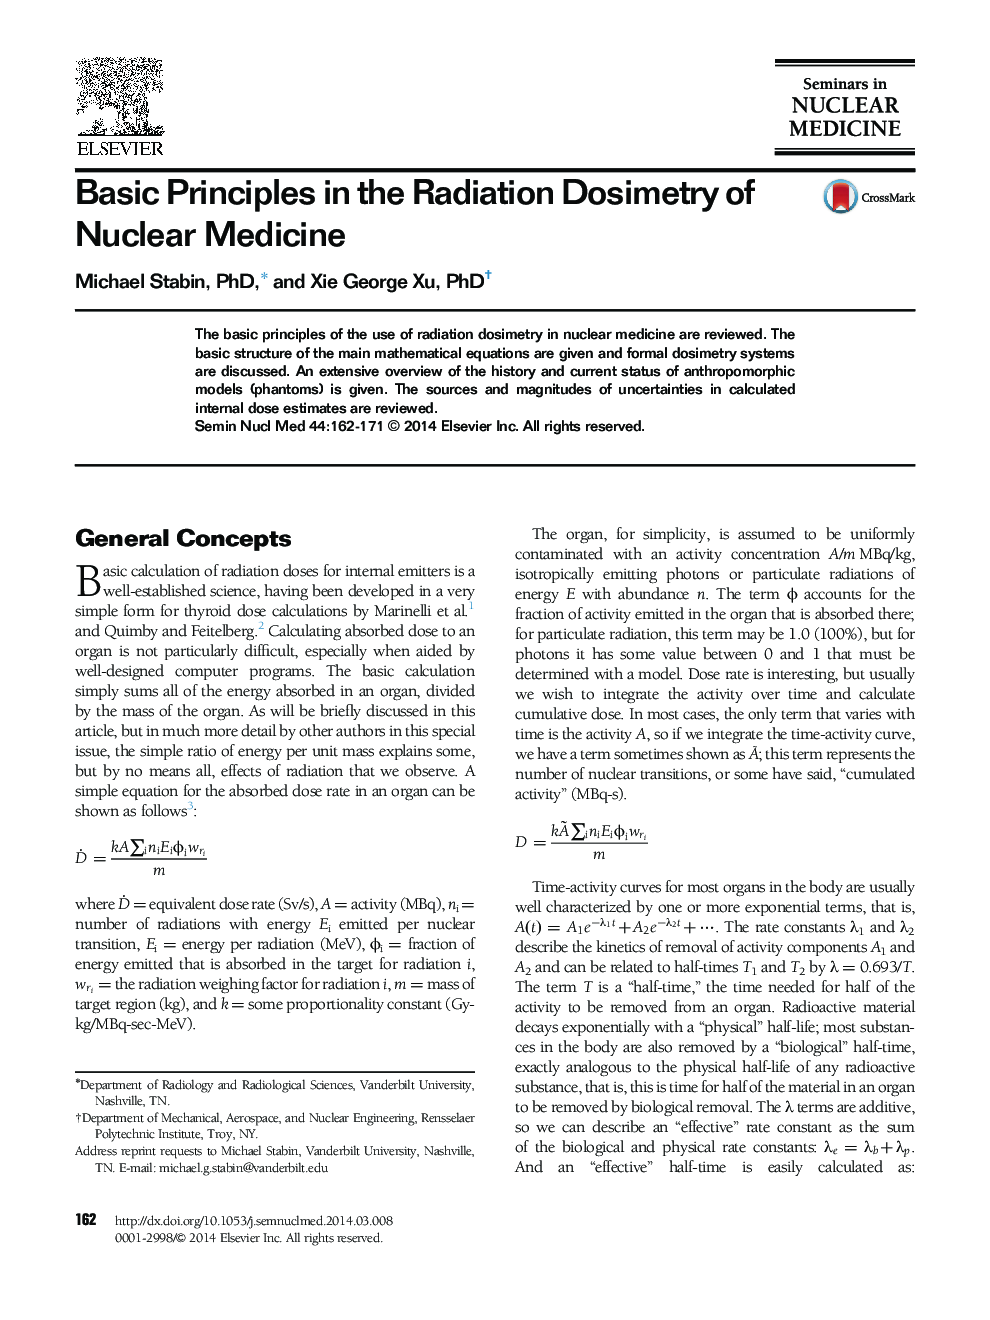 Basic Principles in the Radiation Dosimetry of Nuclear Medicine